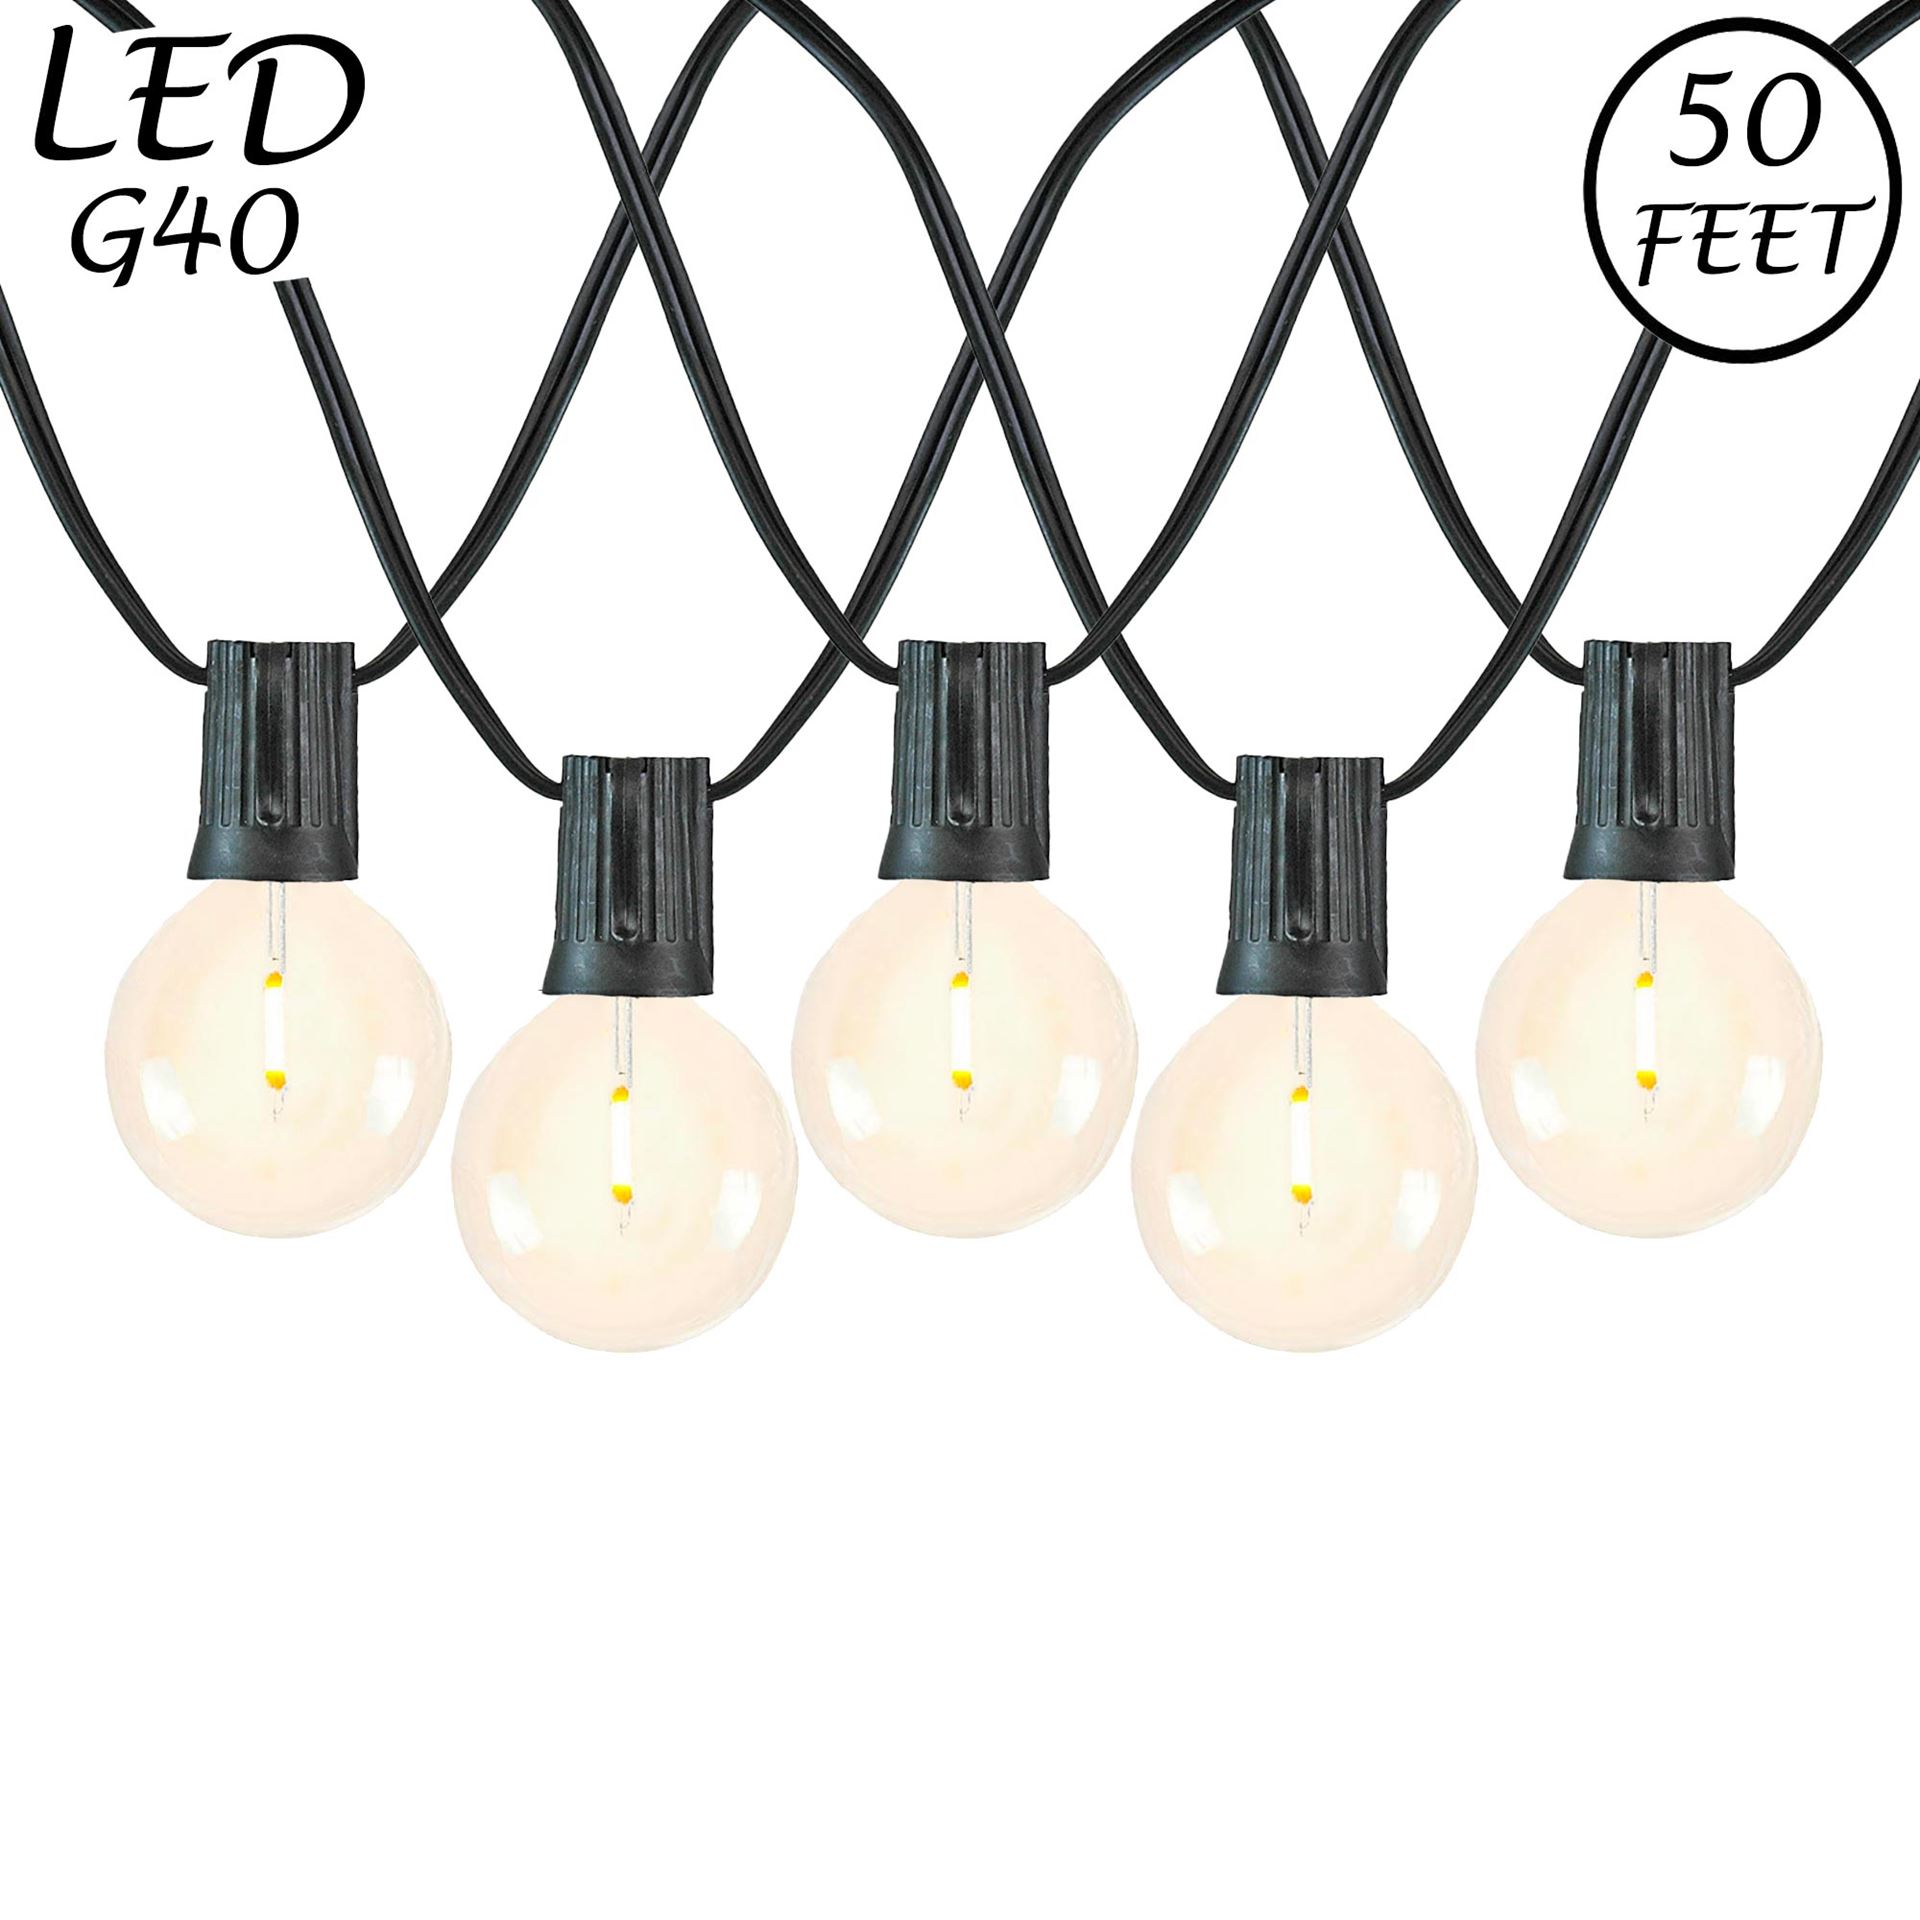 Picture of 50 LED Filament G40 Globe String Light Set with Warm White Bulbs on Black Wire